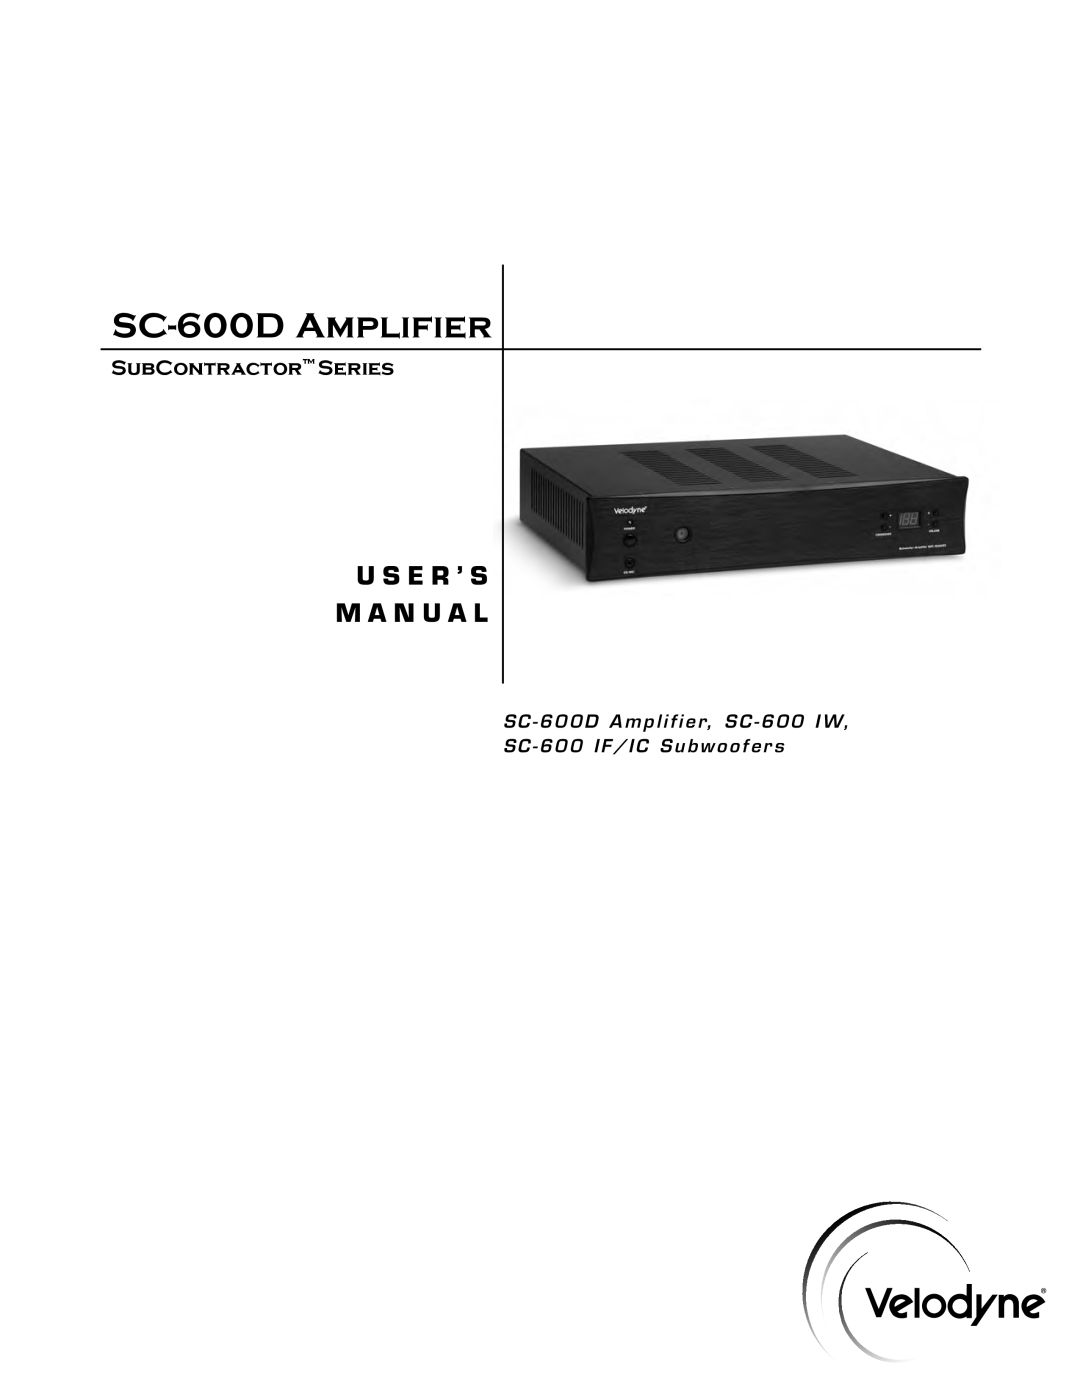 Velodyne Acoustics SC-600 IF/IC installation manual SC-600IF/IC, In-Floor/In-CeilingSubwoofer, SubContractorTM Series 